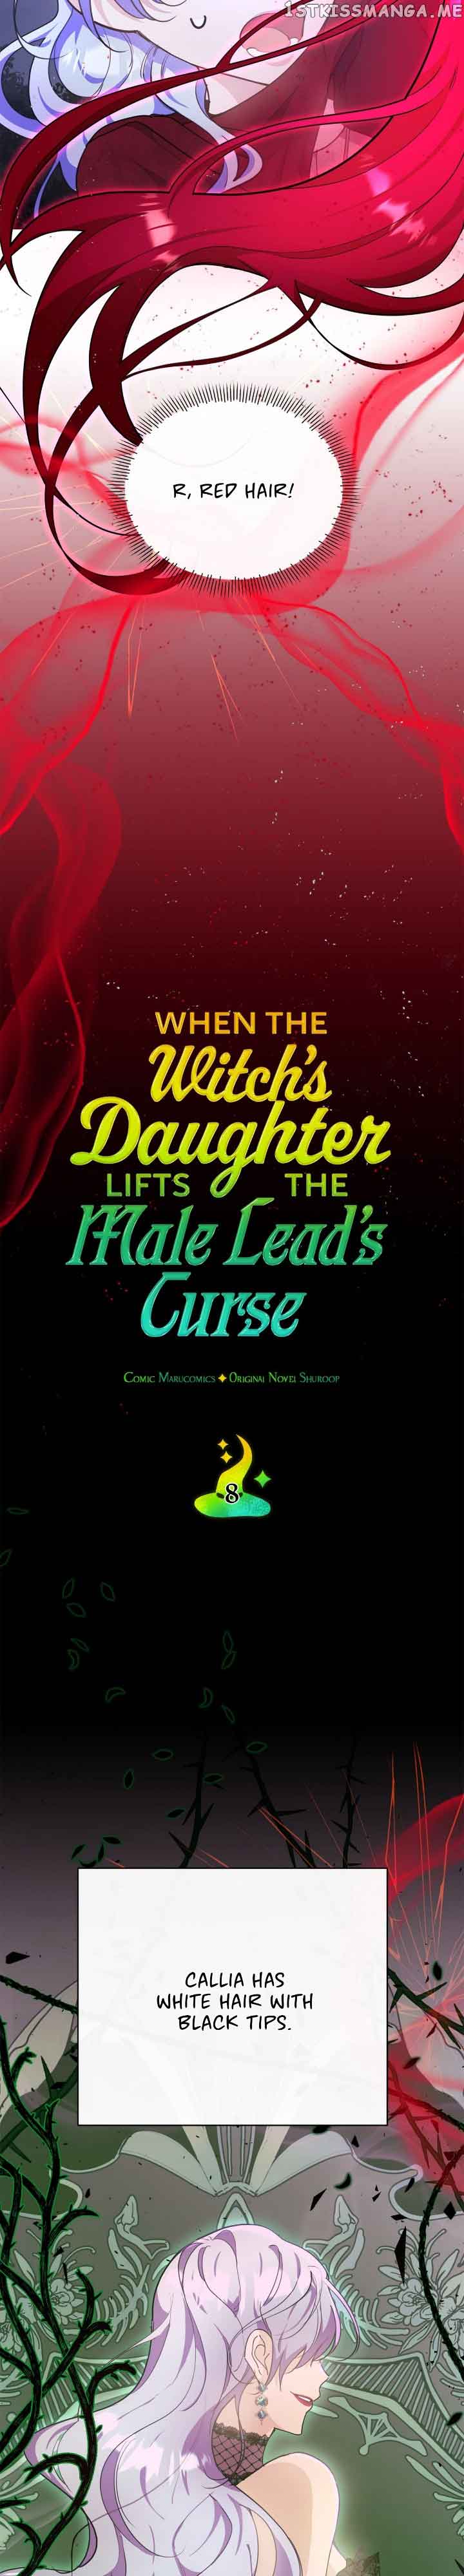 When the Witch’s Daughter Lifts the Male Lead’s Curse chapter 8